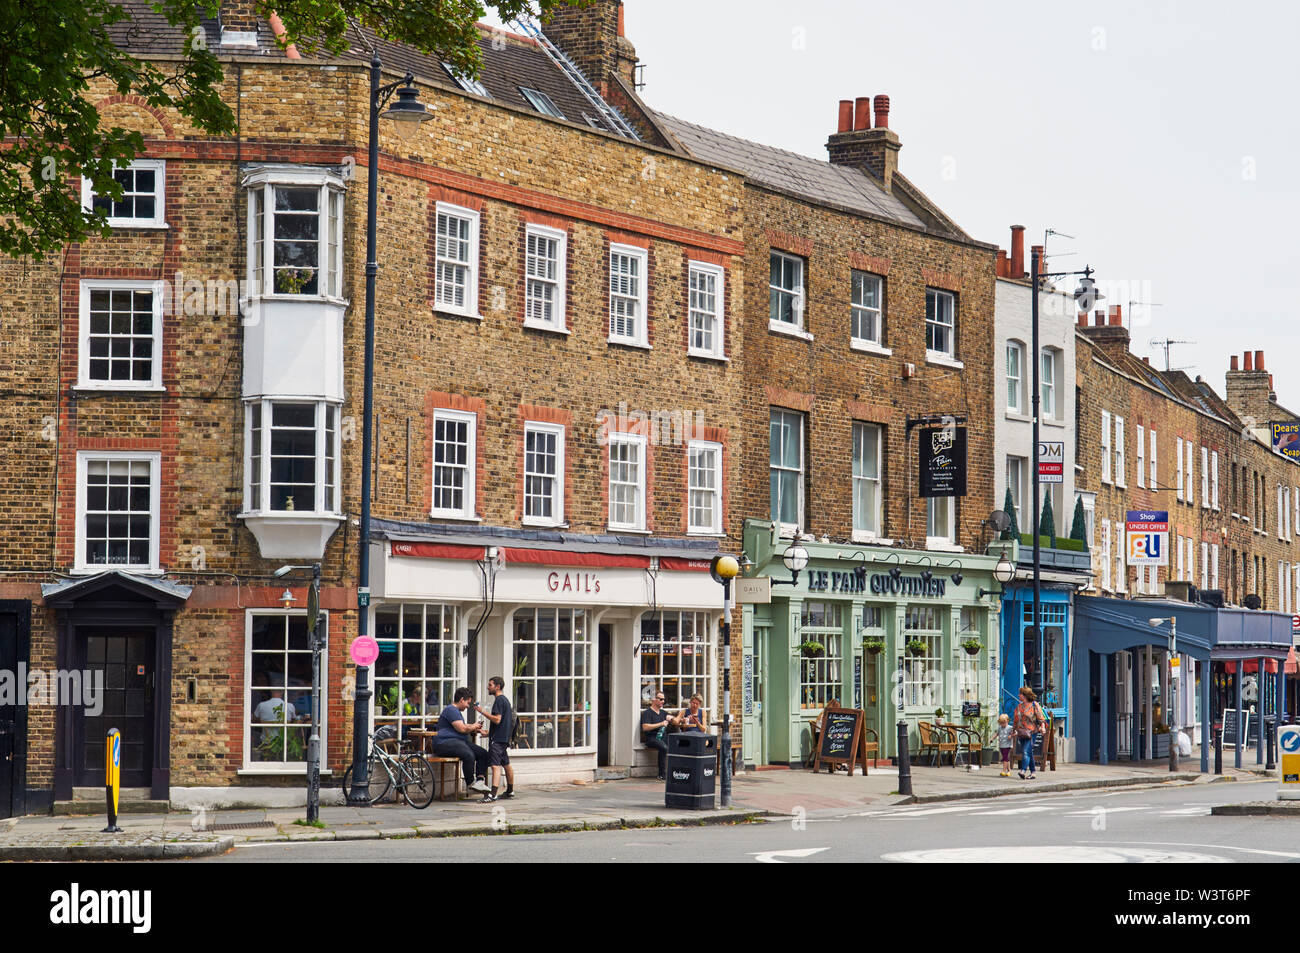 Cafes and shops on Highgate High Street in the upmarket London suburb of Highgate, North london UK Stock Photo